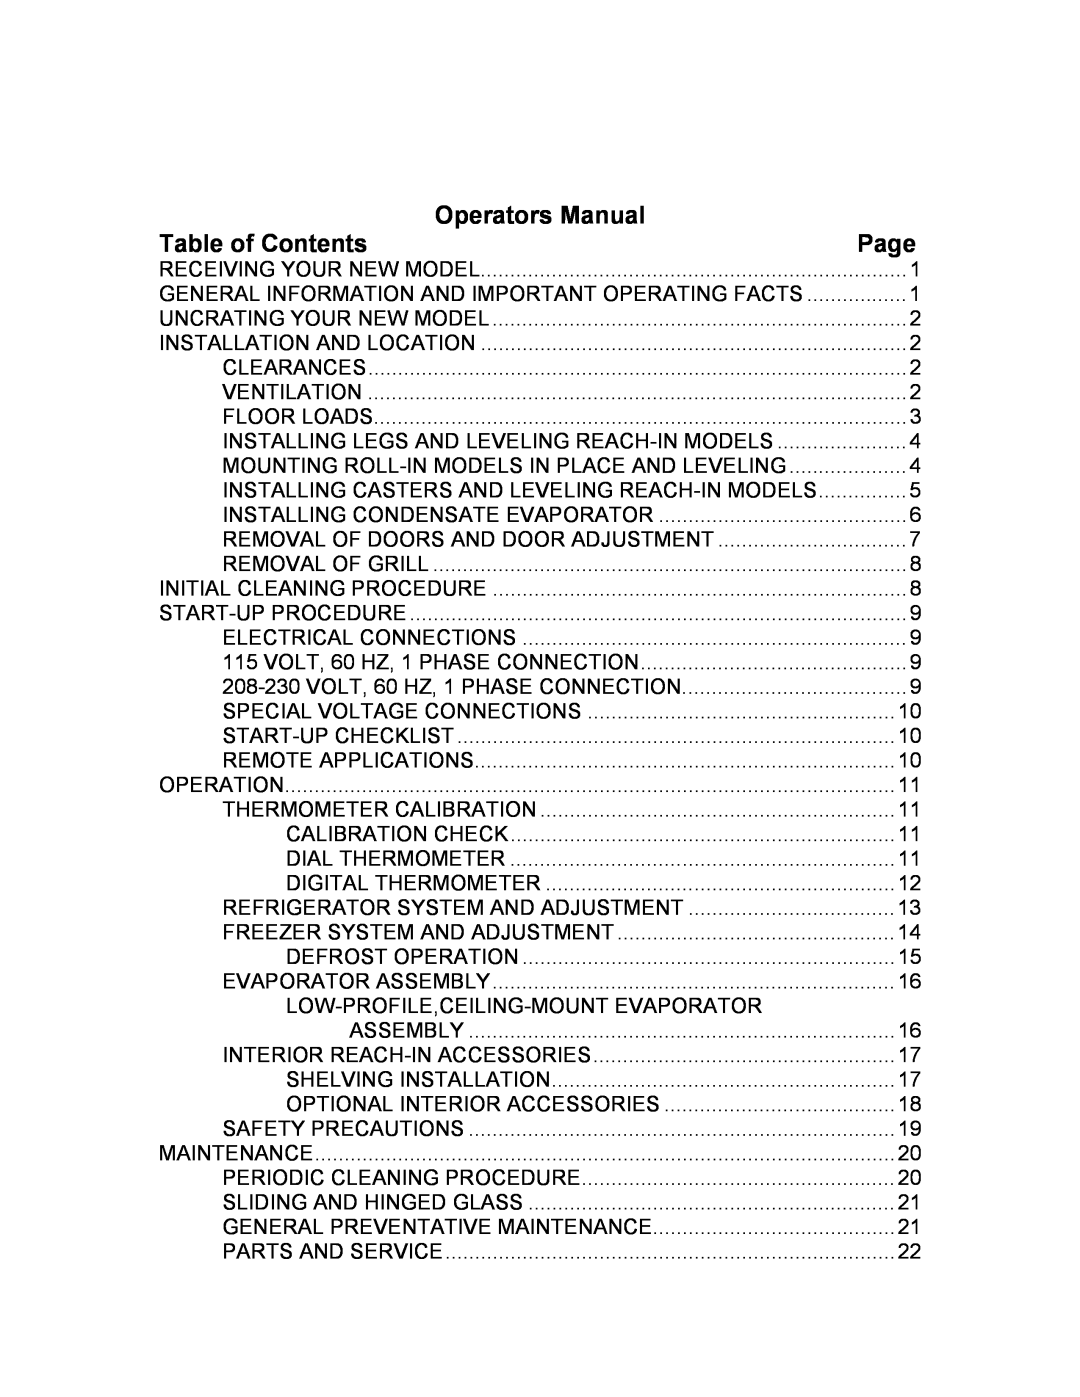 Continental Refrigerator Refrigerators and Freezers instruction manual Operators Manual, Table of Contents, Page 